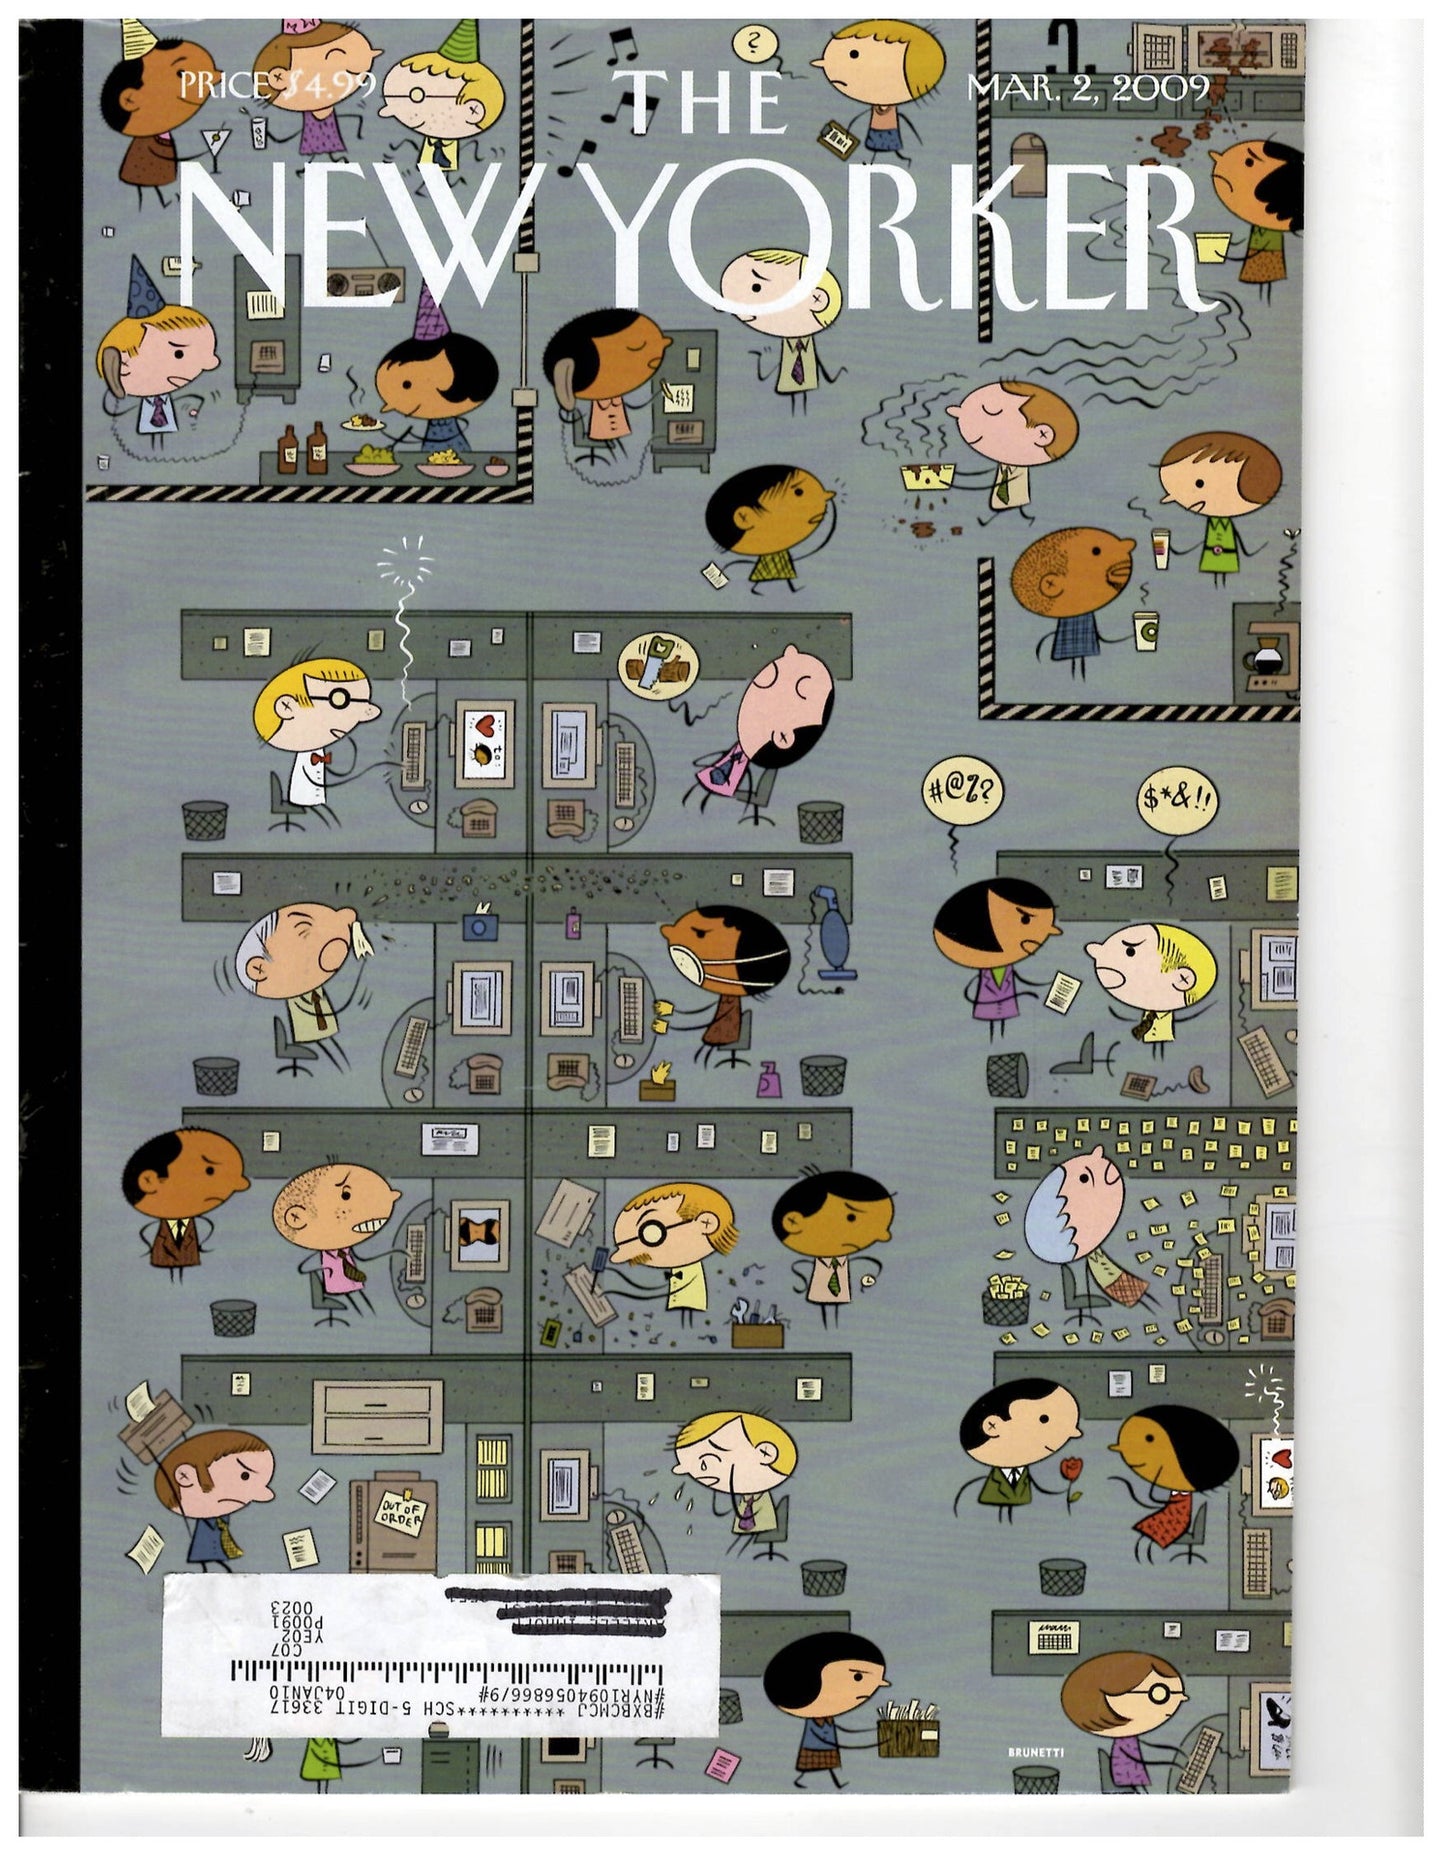 03 02 2009 The New Yorker